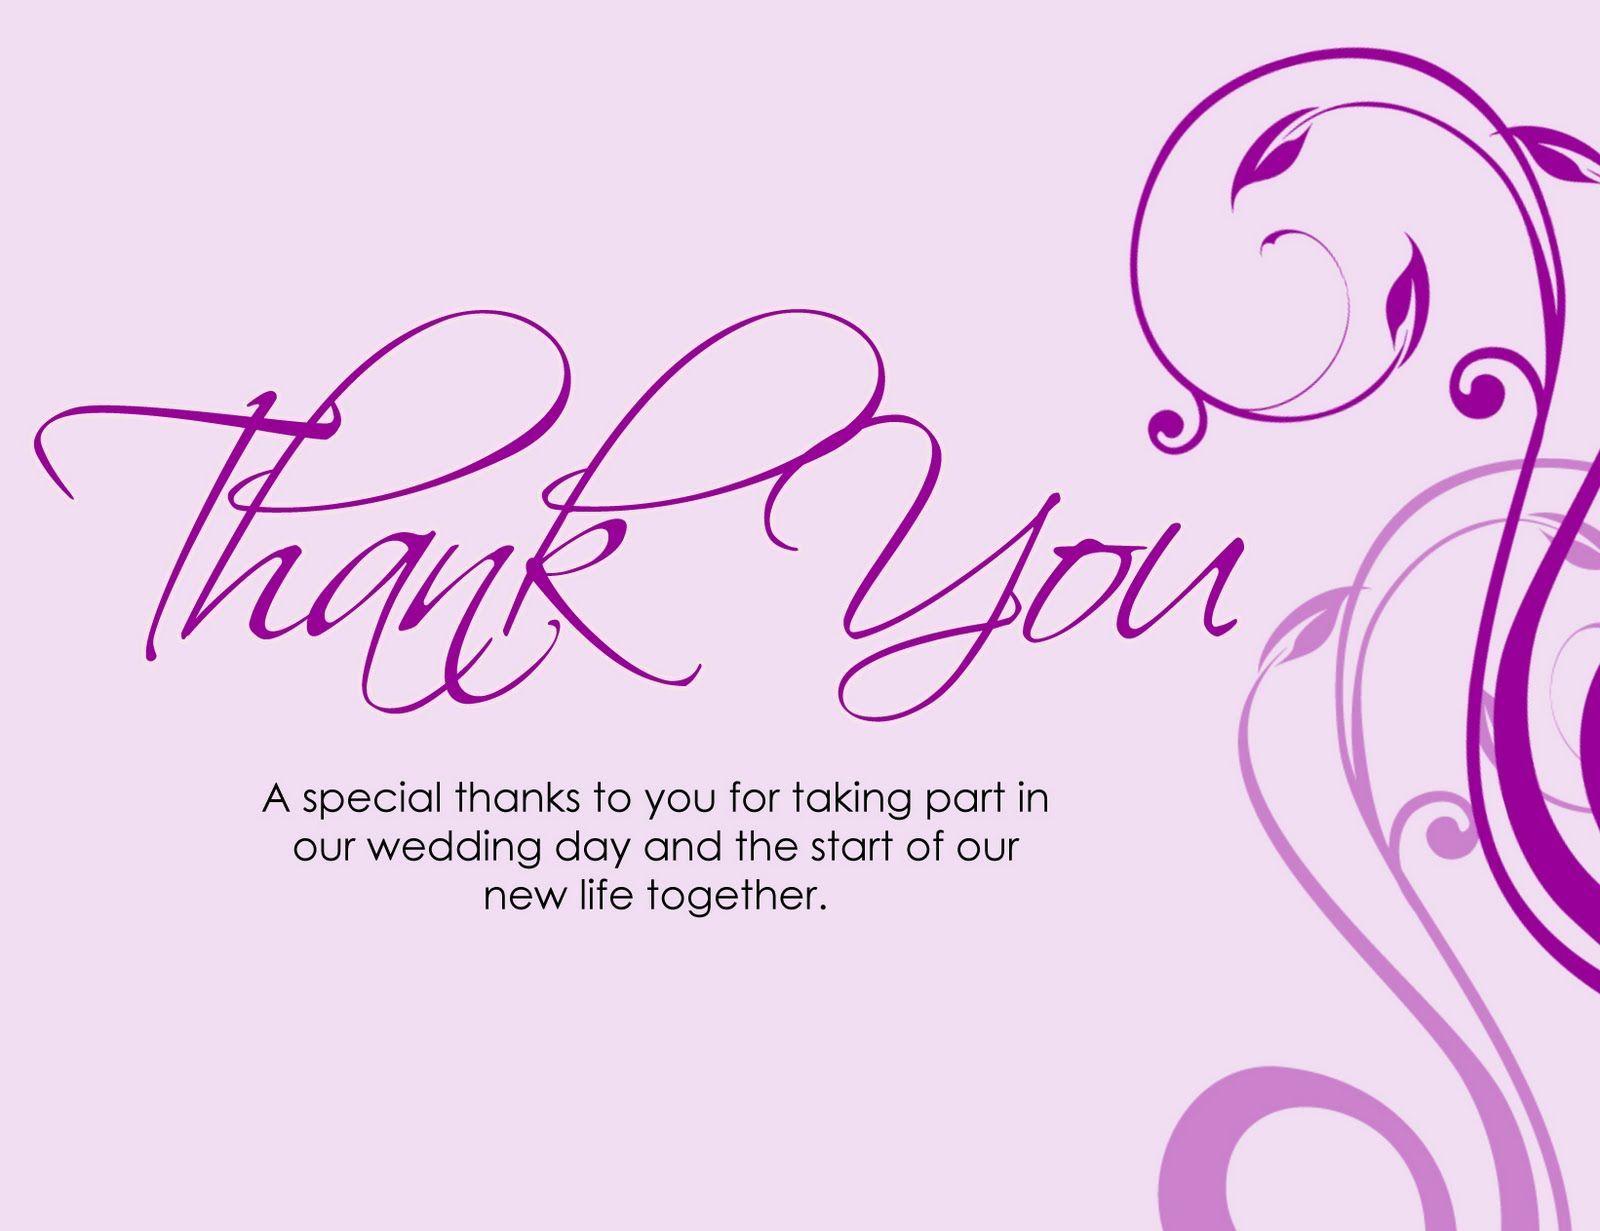 A special thanks to you for taking part in our wedding day and